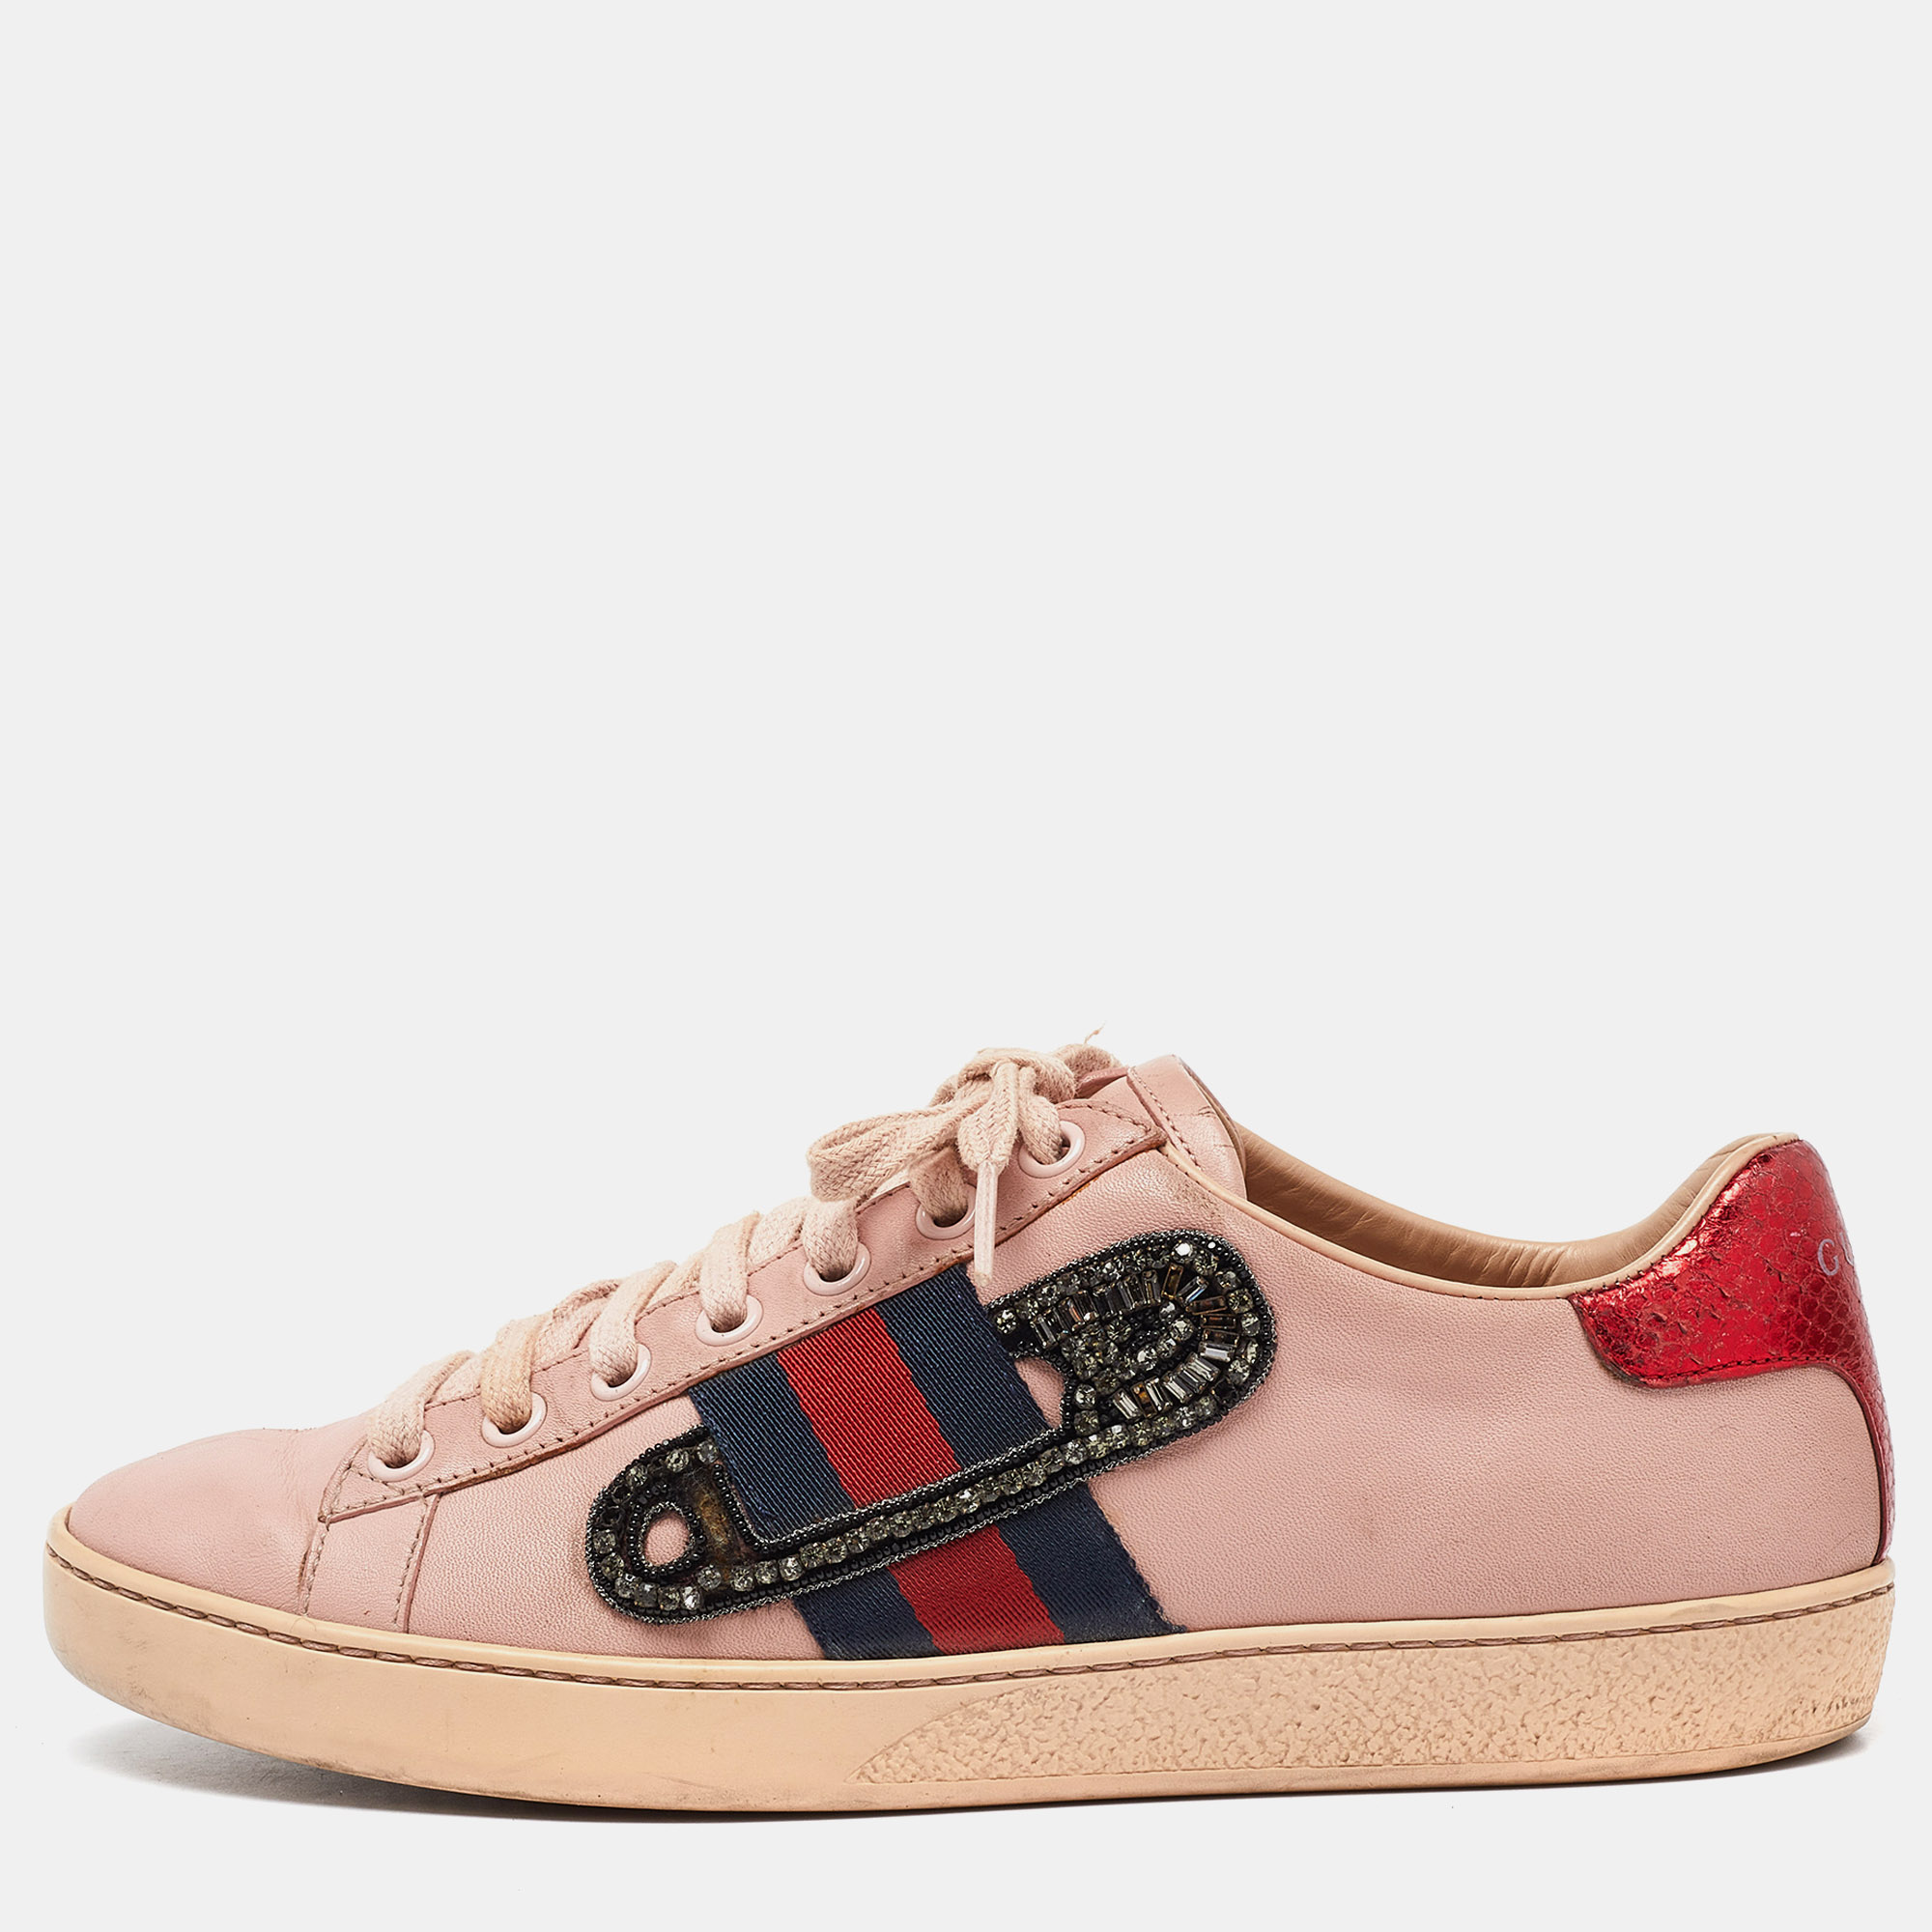 Gucci pink leather ace web crystal embellished low top sneakers size 36